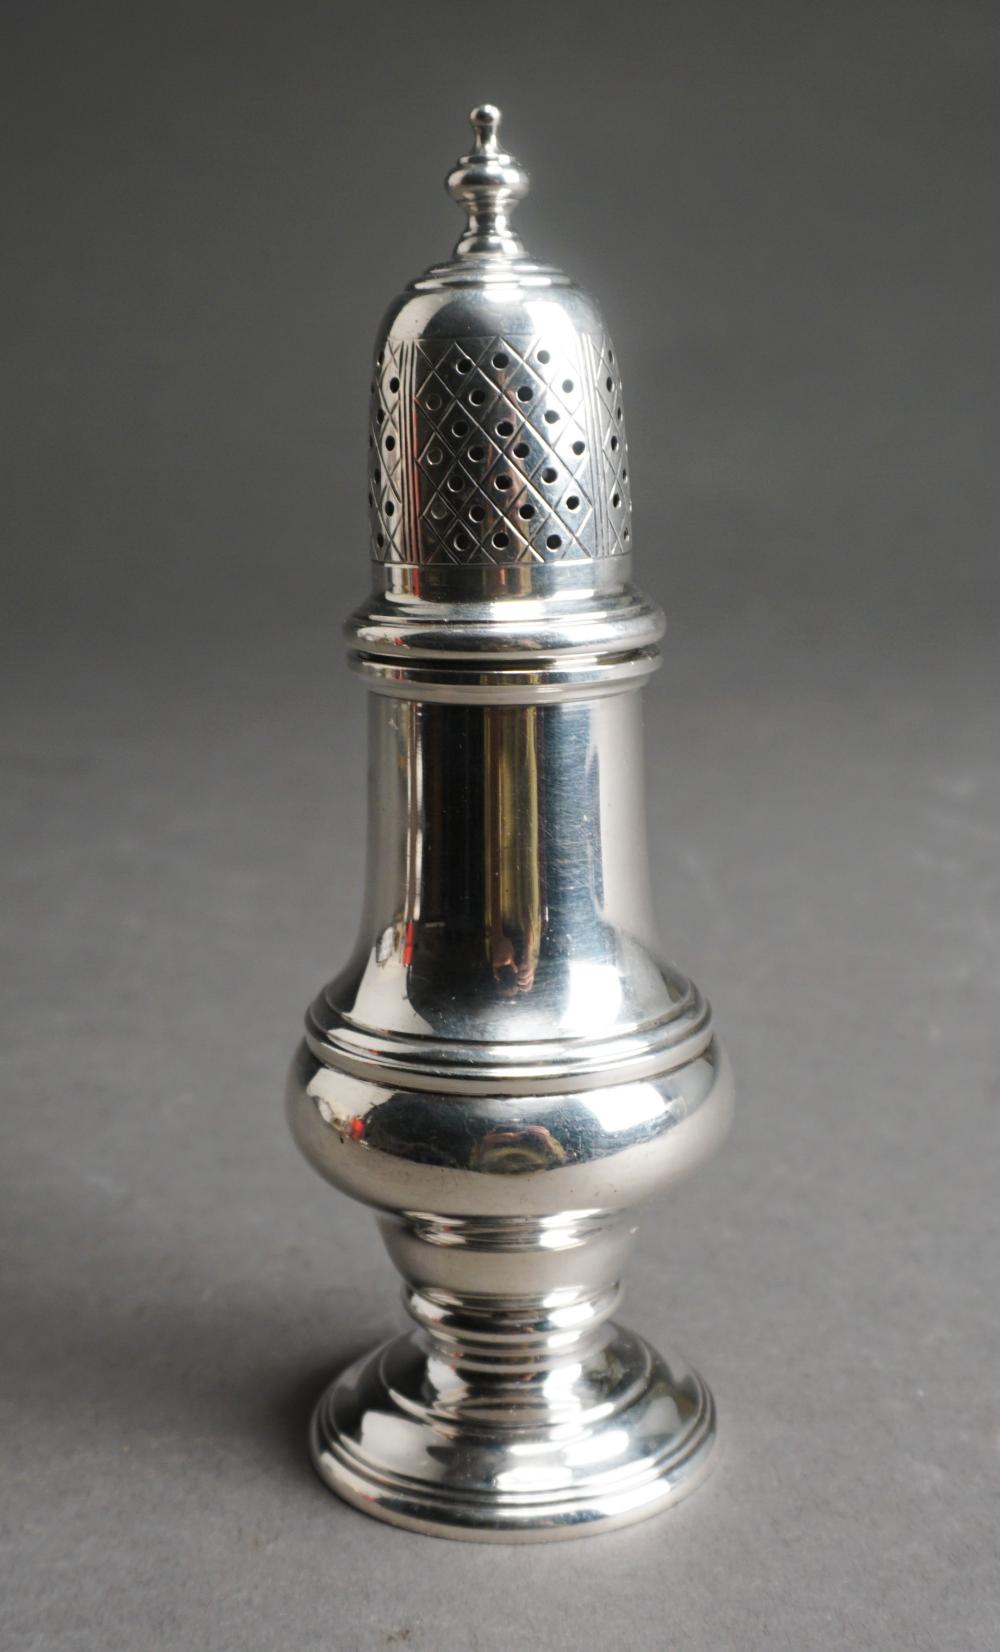 REPRODUCTION STERLING SILVER MUFFINEER 2e4d31